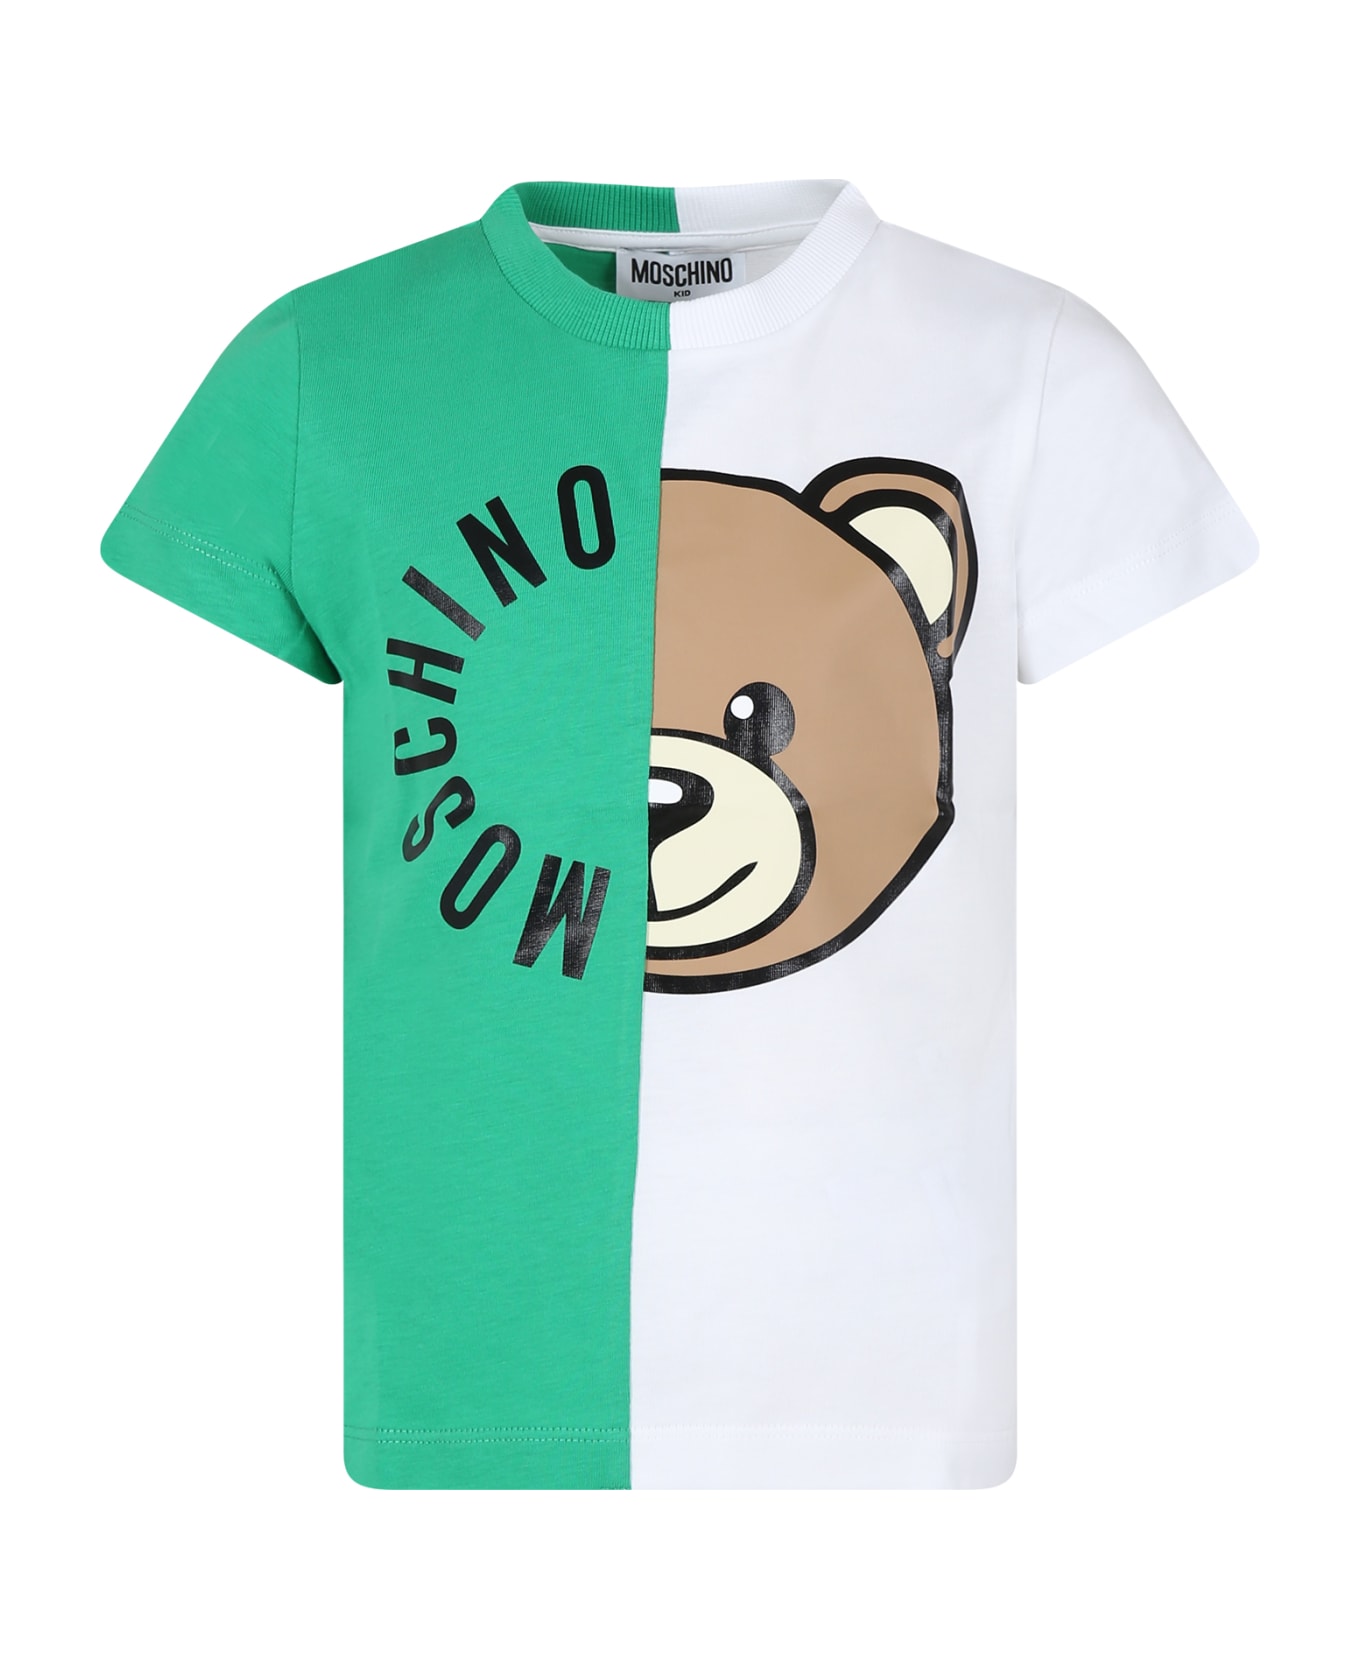 Moschino Green T-shirt For Kids With Teddy Bear And Logo - Green